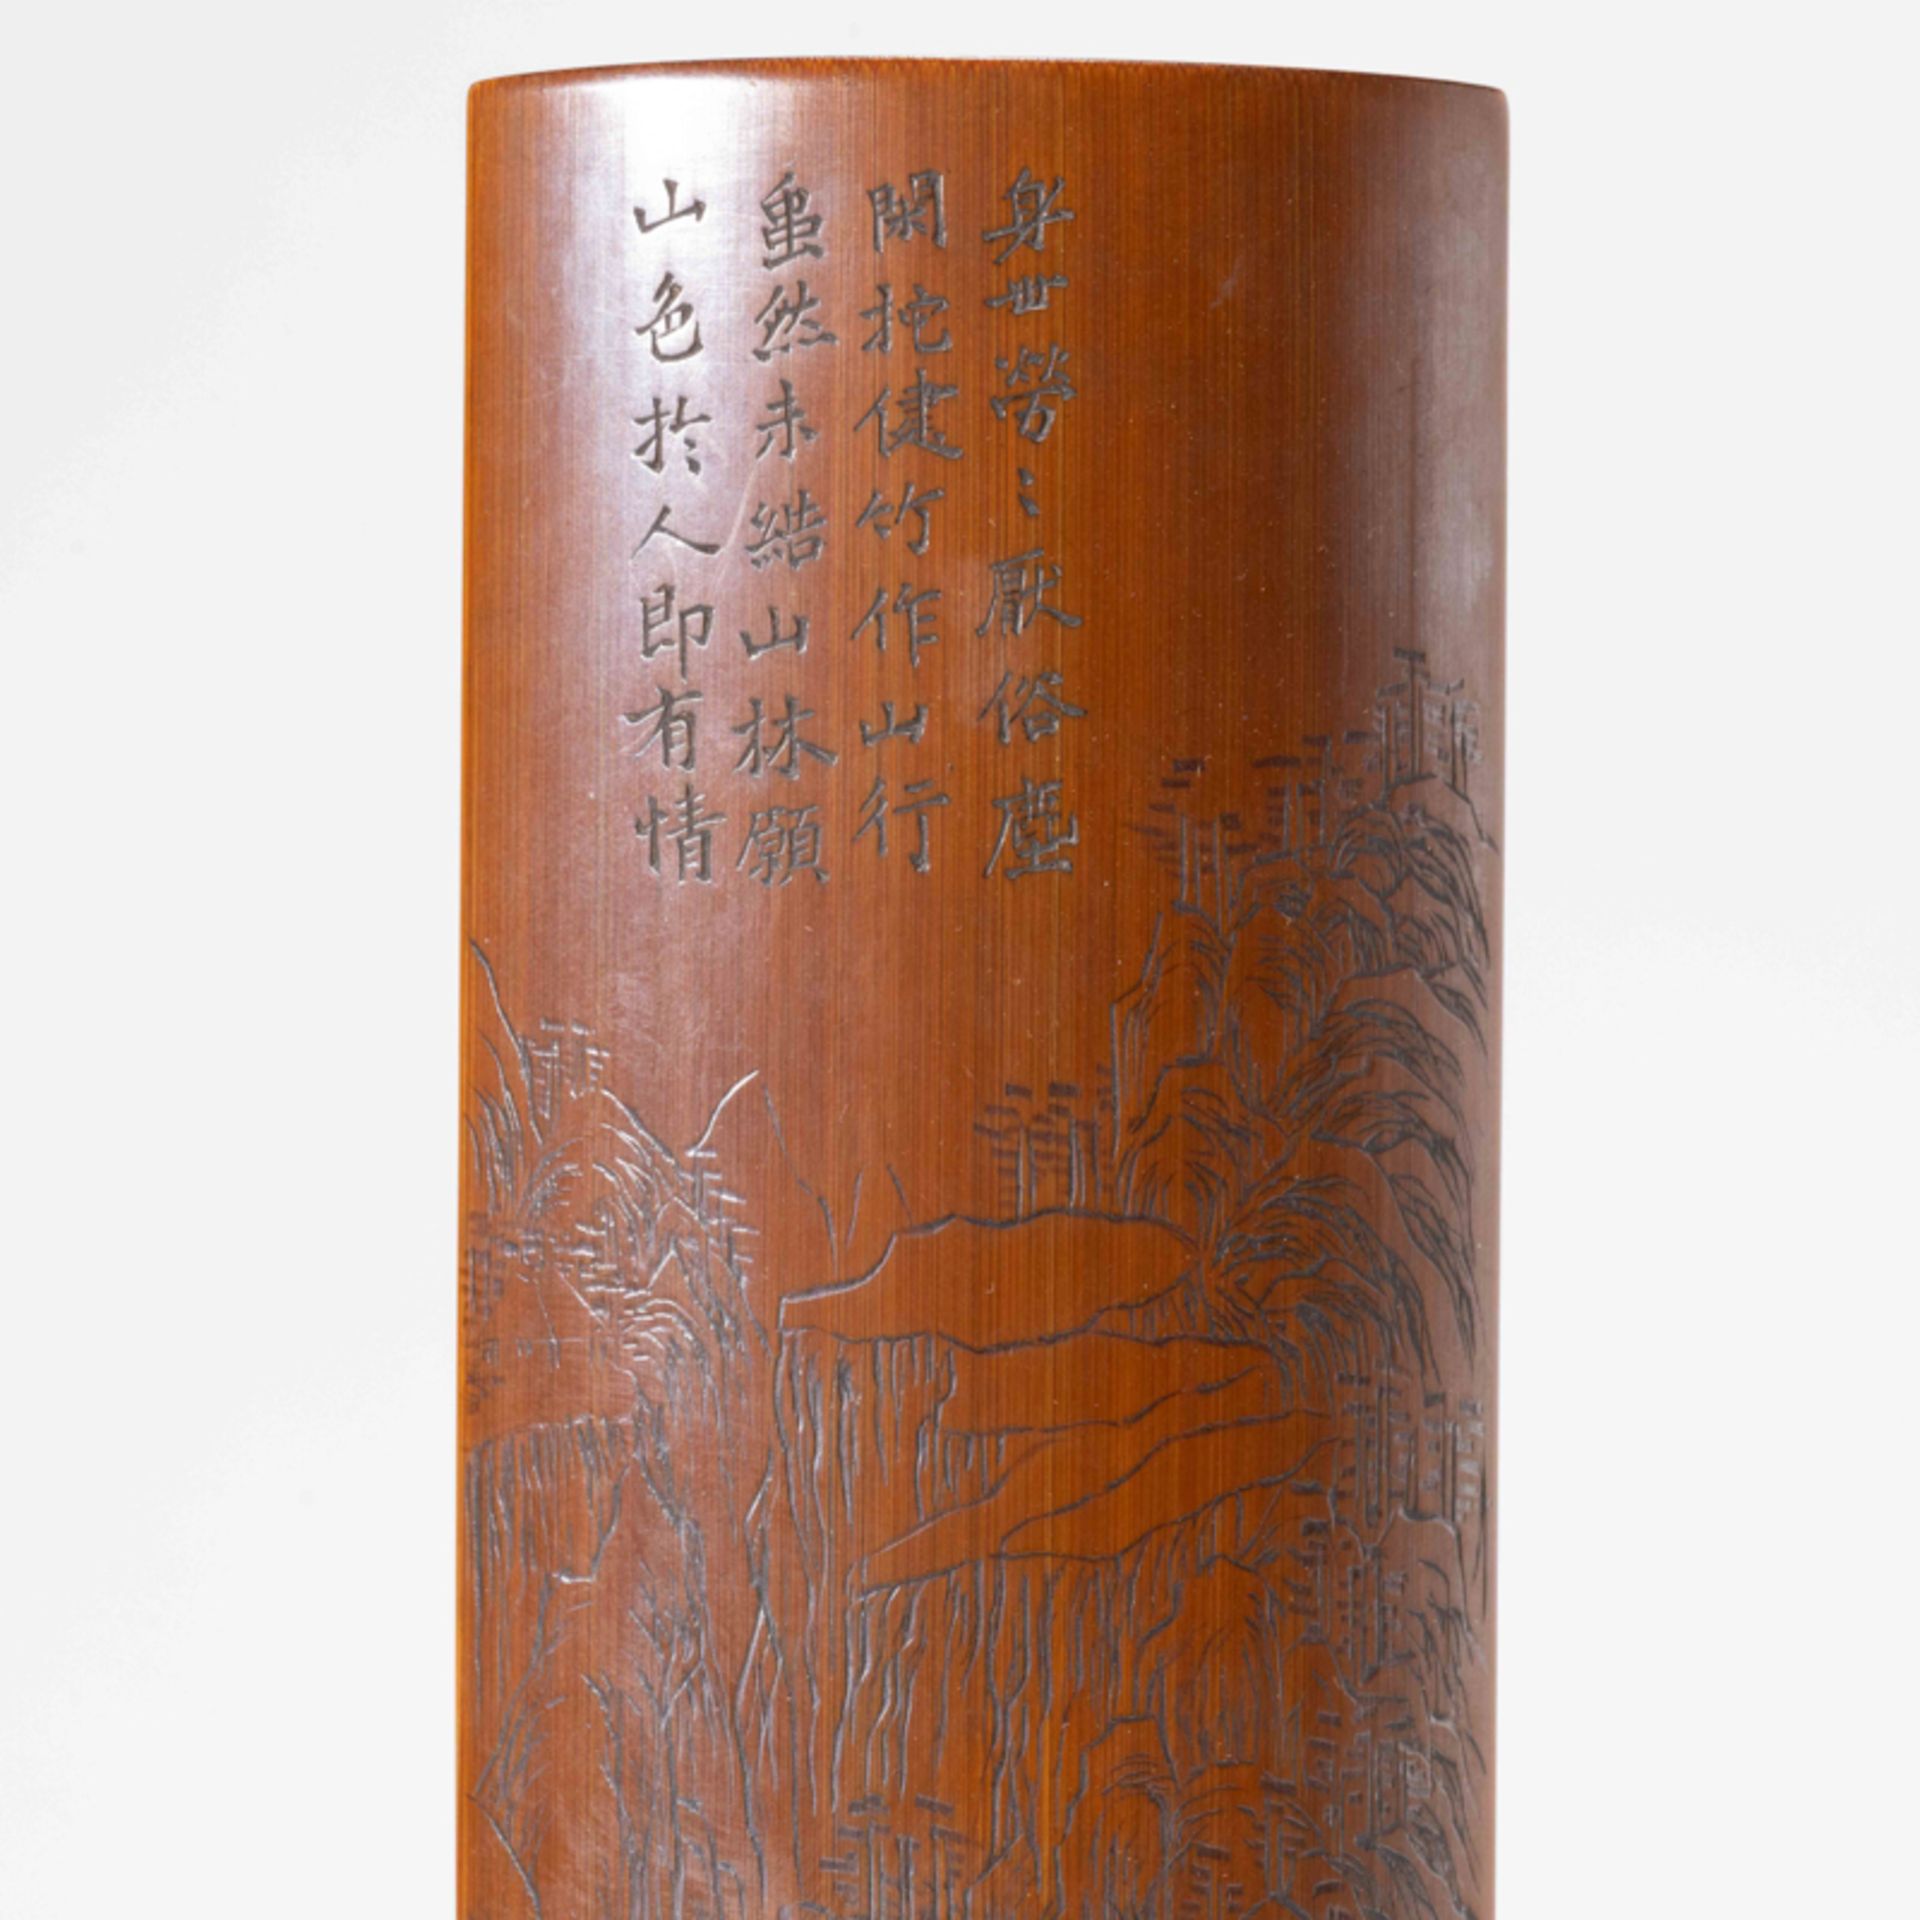 A CHINESE BAMBOO 'LANDSCAPE AND POEM' WRIST REST, QING DYNASTY - Image 2 of 9